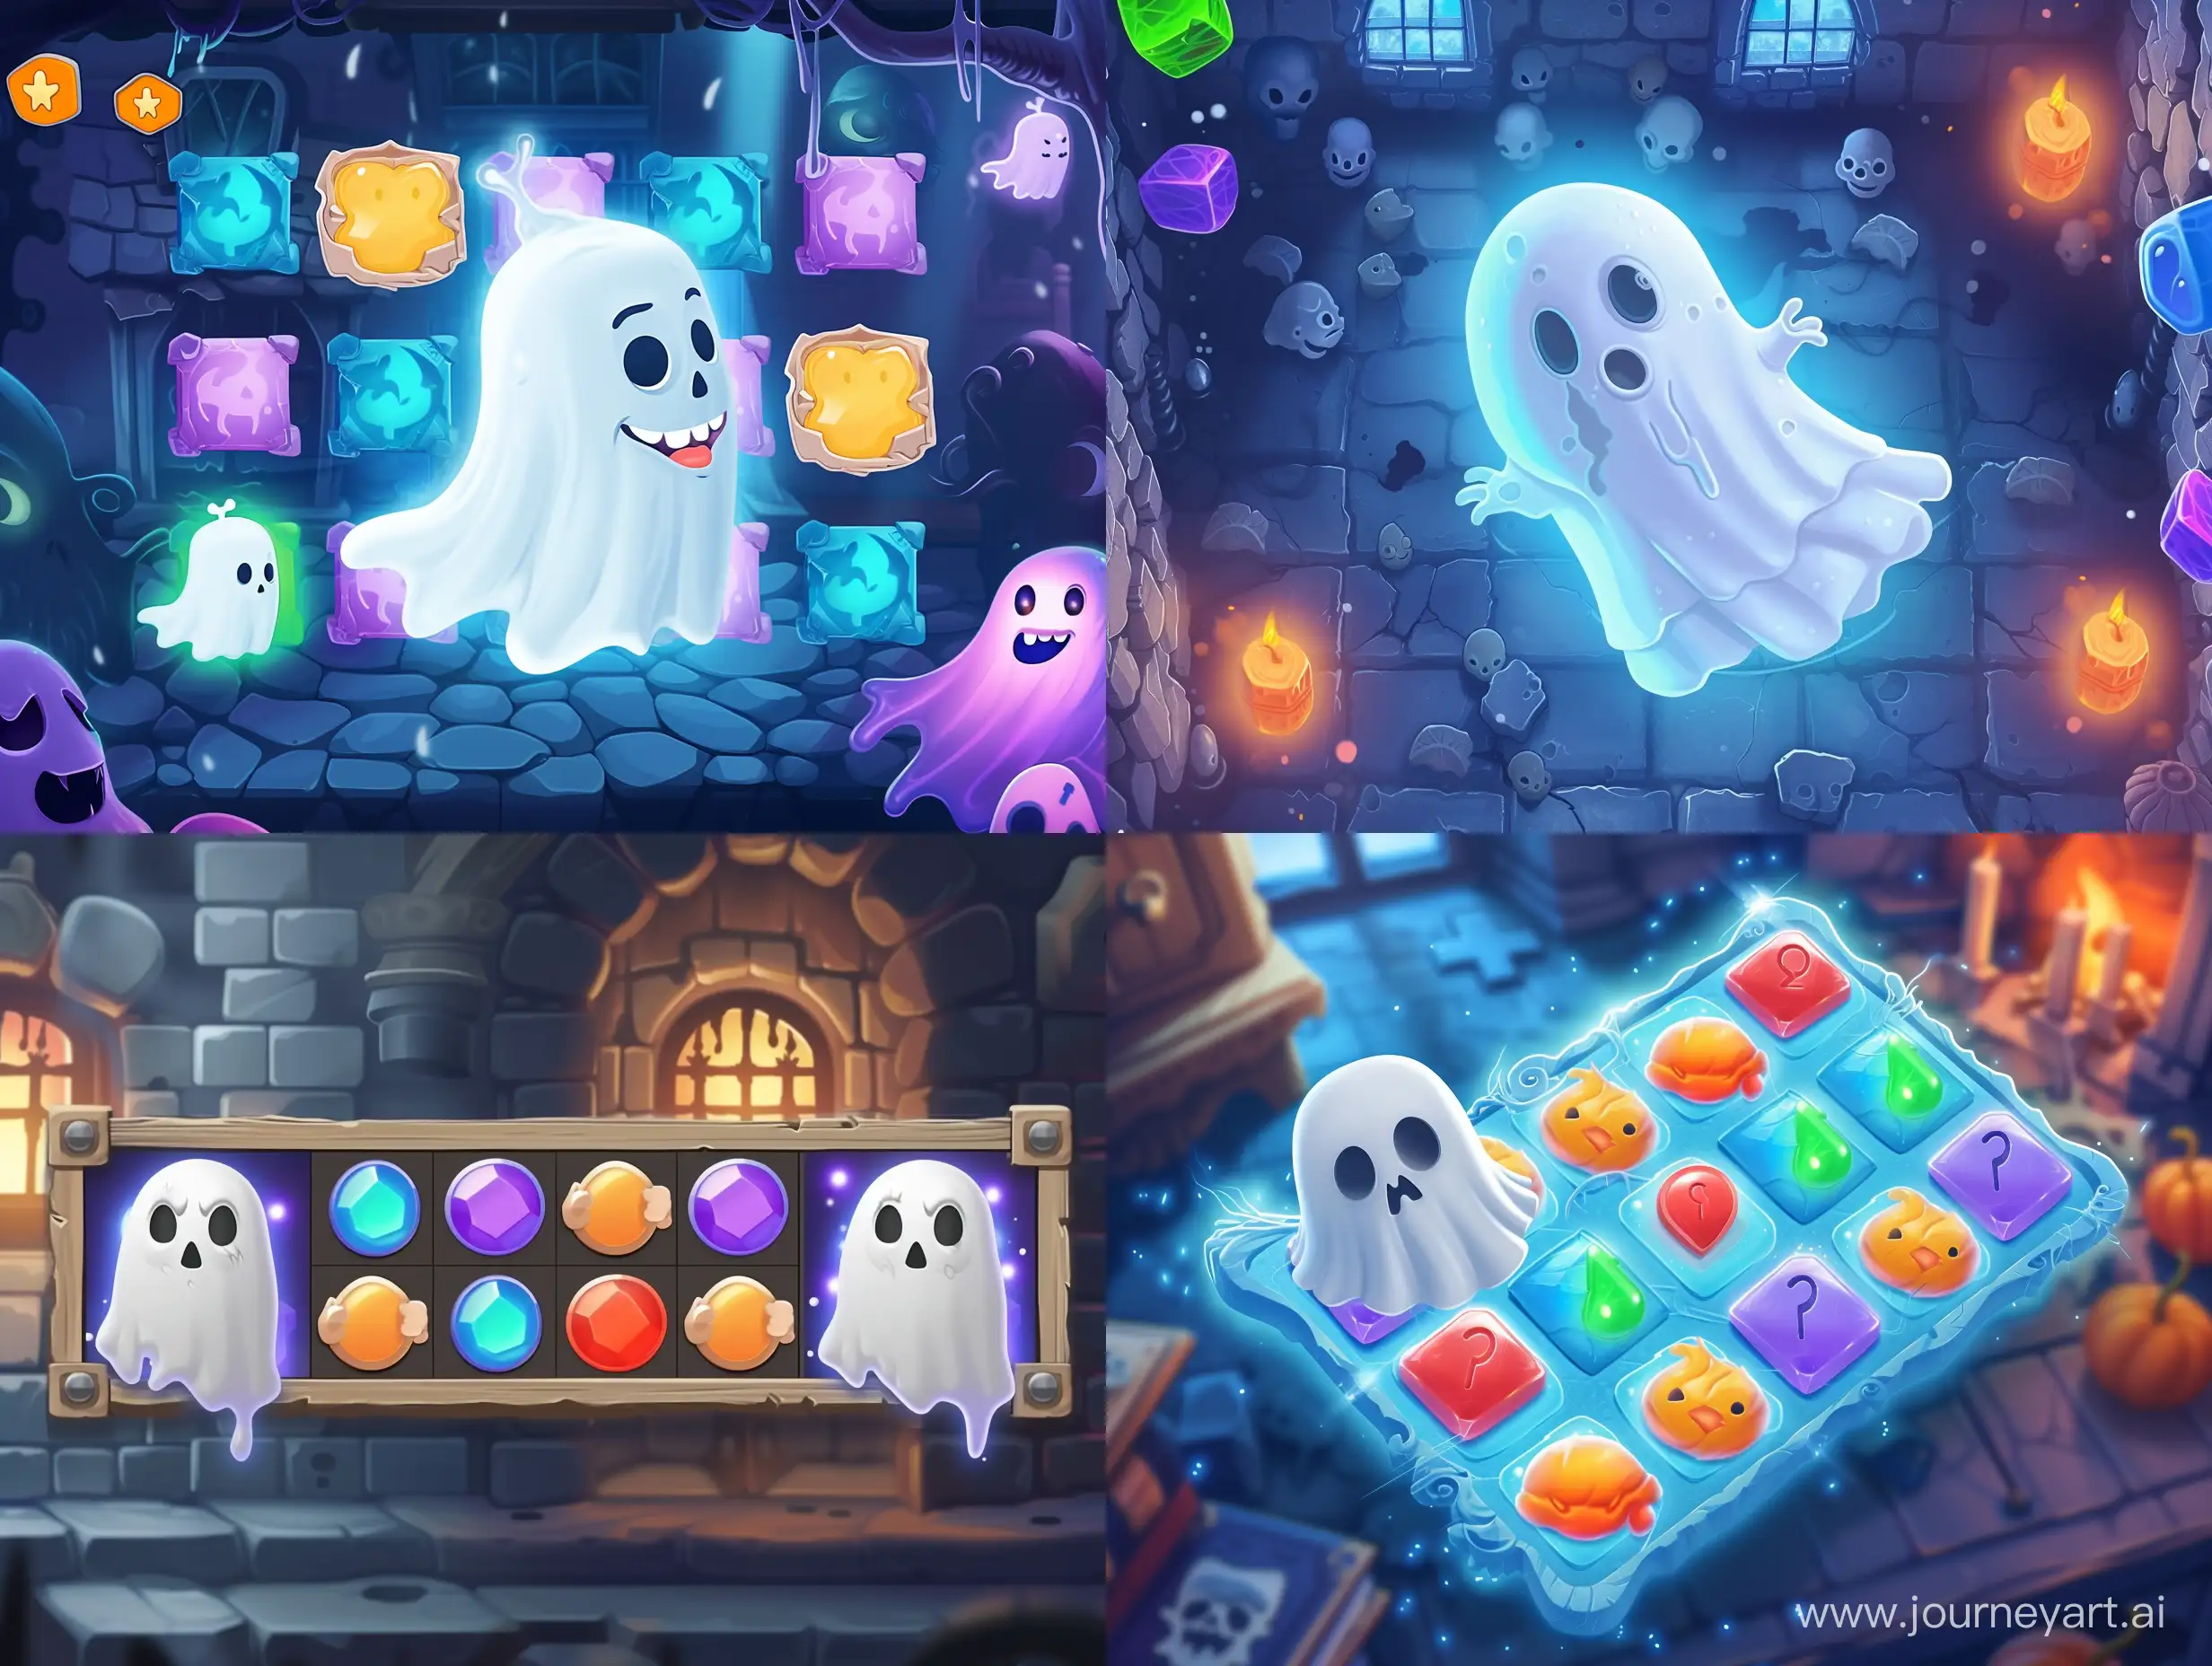 Spooky-Ghost-Match3-Game-Screensaver-with-6-Exciting-Levels-in-43-Aspect-Ratio